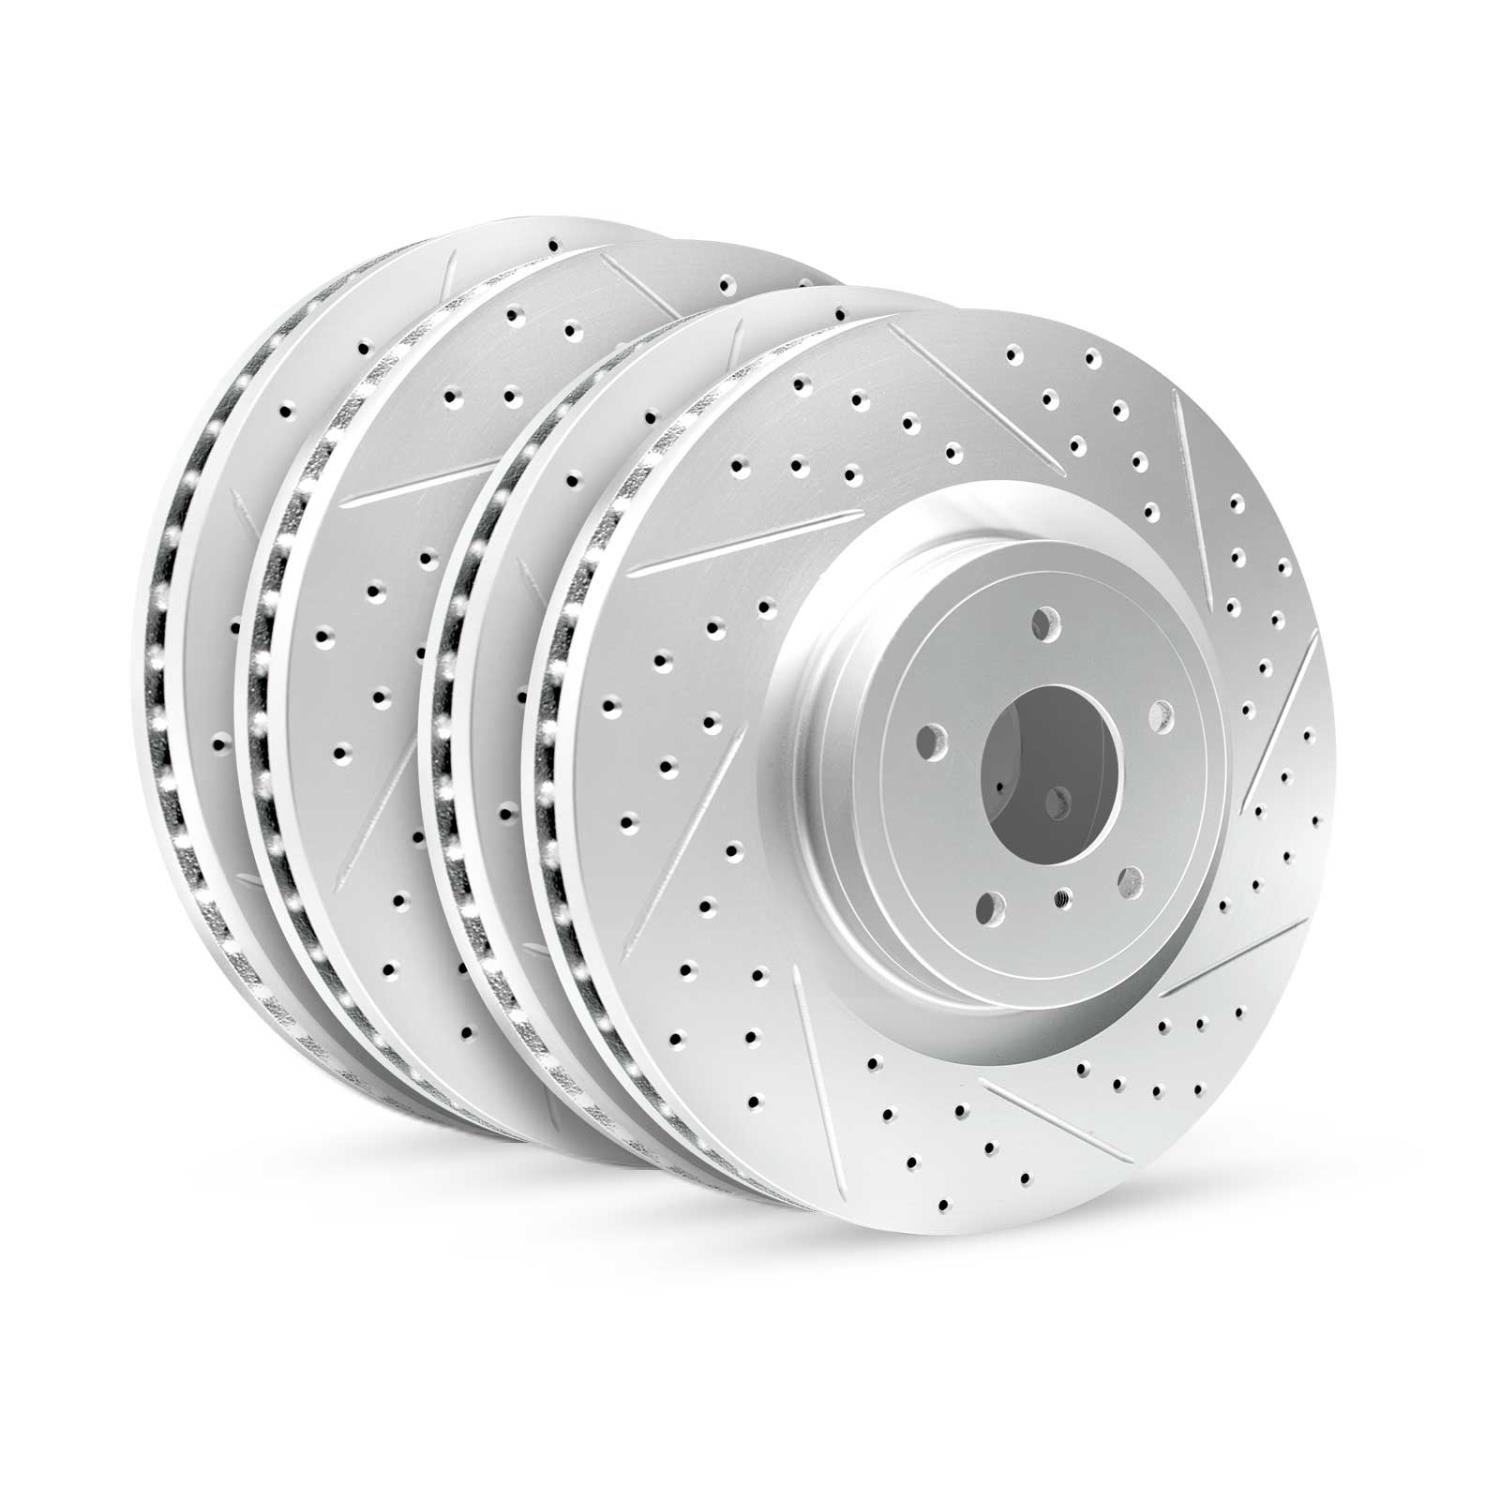 GEO-Carbon Drilled/Slotted Rotors, 2014-2020 Lexus/Toyota/Scion, Position: Front/Rear